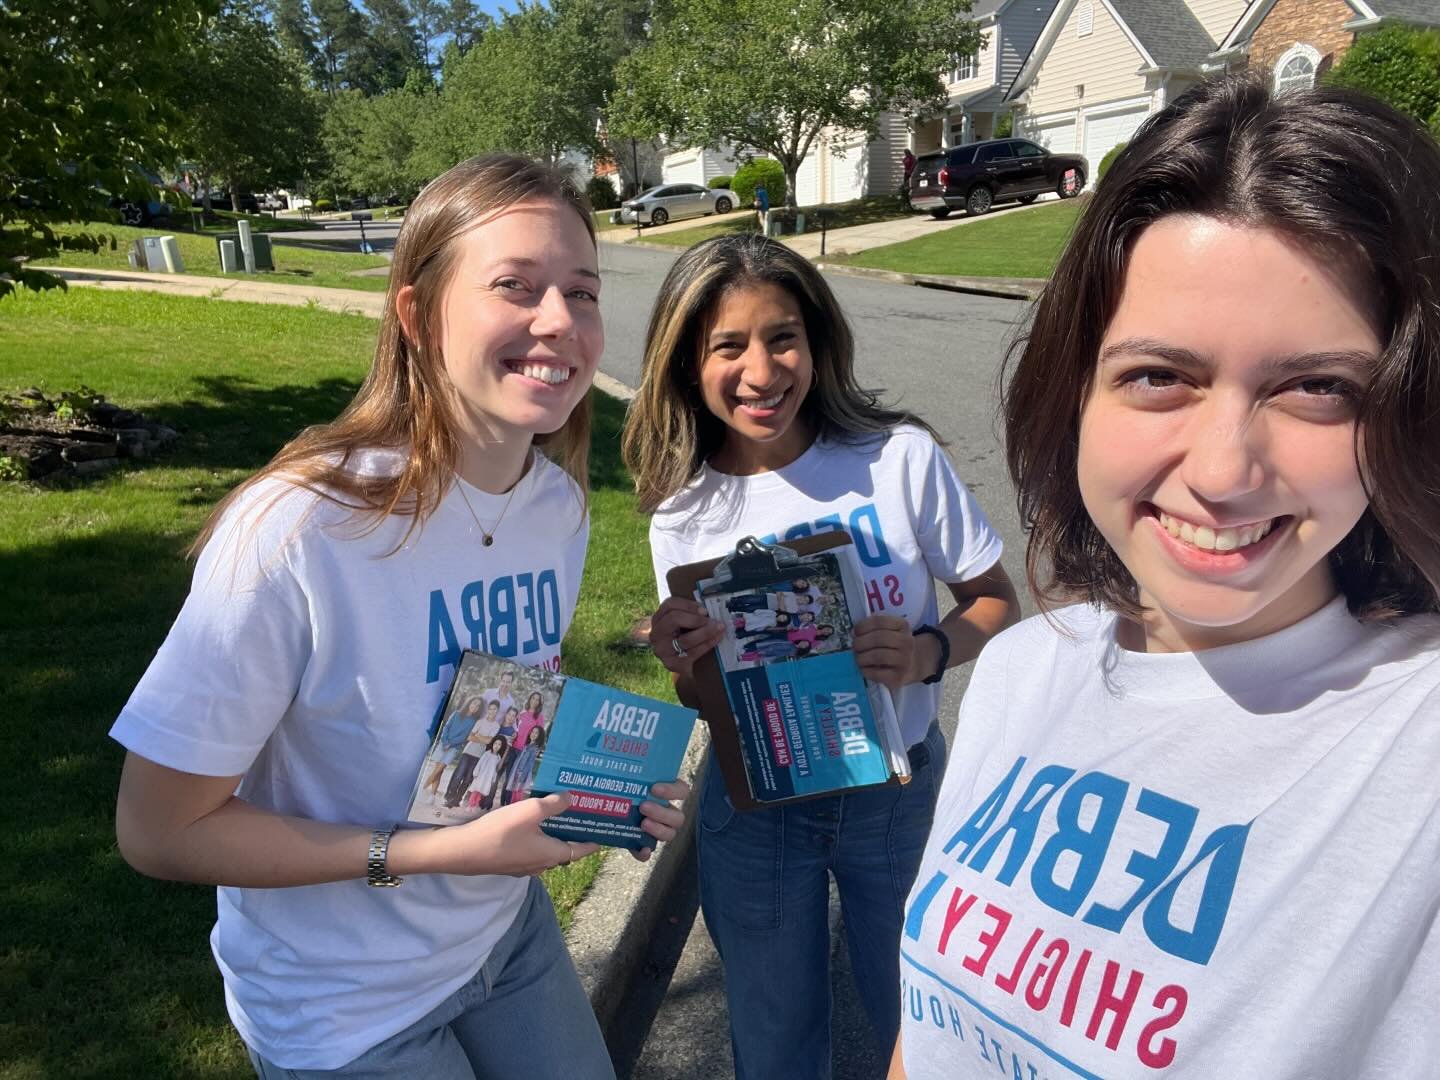 It&rsquo;s a beautiful day to knock doors! ☀️

Reminder: tomorrow, Friday, is the last day of Early Voting. The final day to vote is Election Day, Tuesday May 21st!